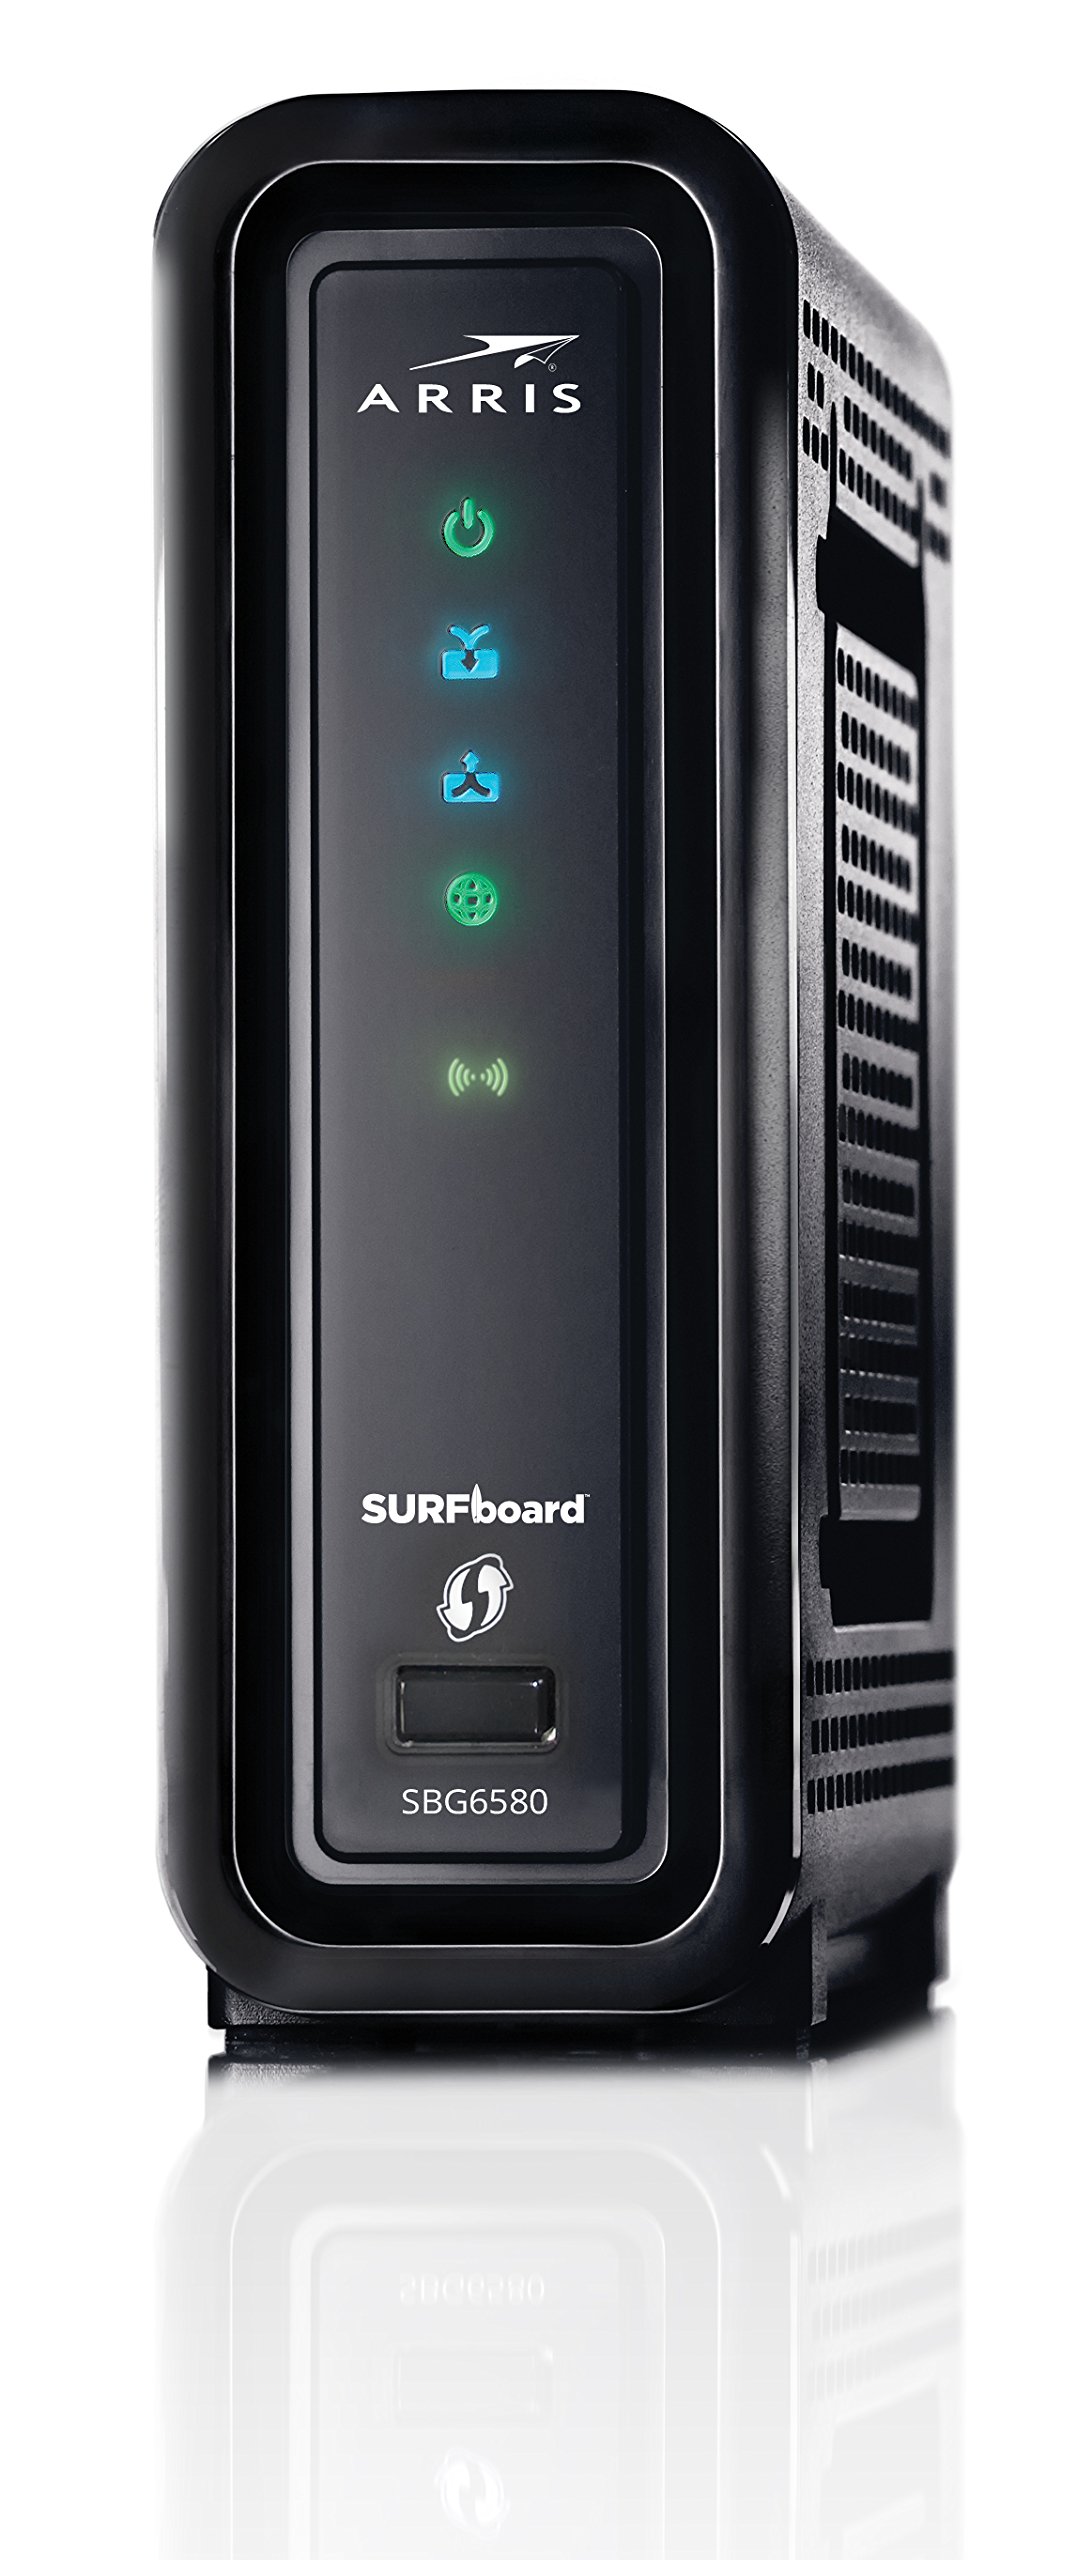 ARRIS SURFboard DOCSIS 3.0 Cable Modem / N600 Wi-Fi Dual-Band Router. Approved for XFINITY Comcast, Cox, Charter and most other Cable Internet providers for plans up to 150 Mbps.(SBG6580) - image 3 of 9